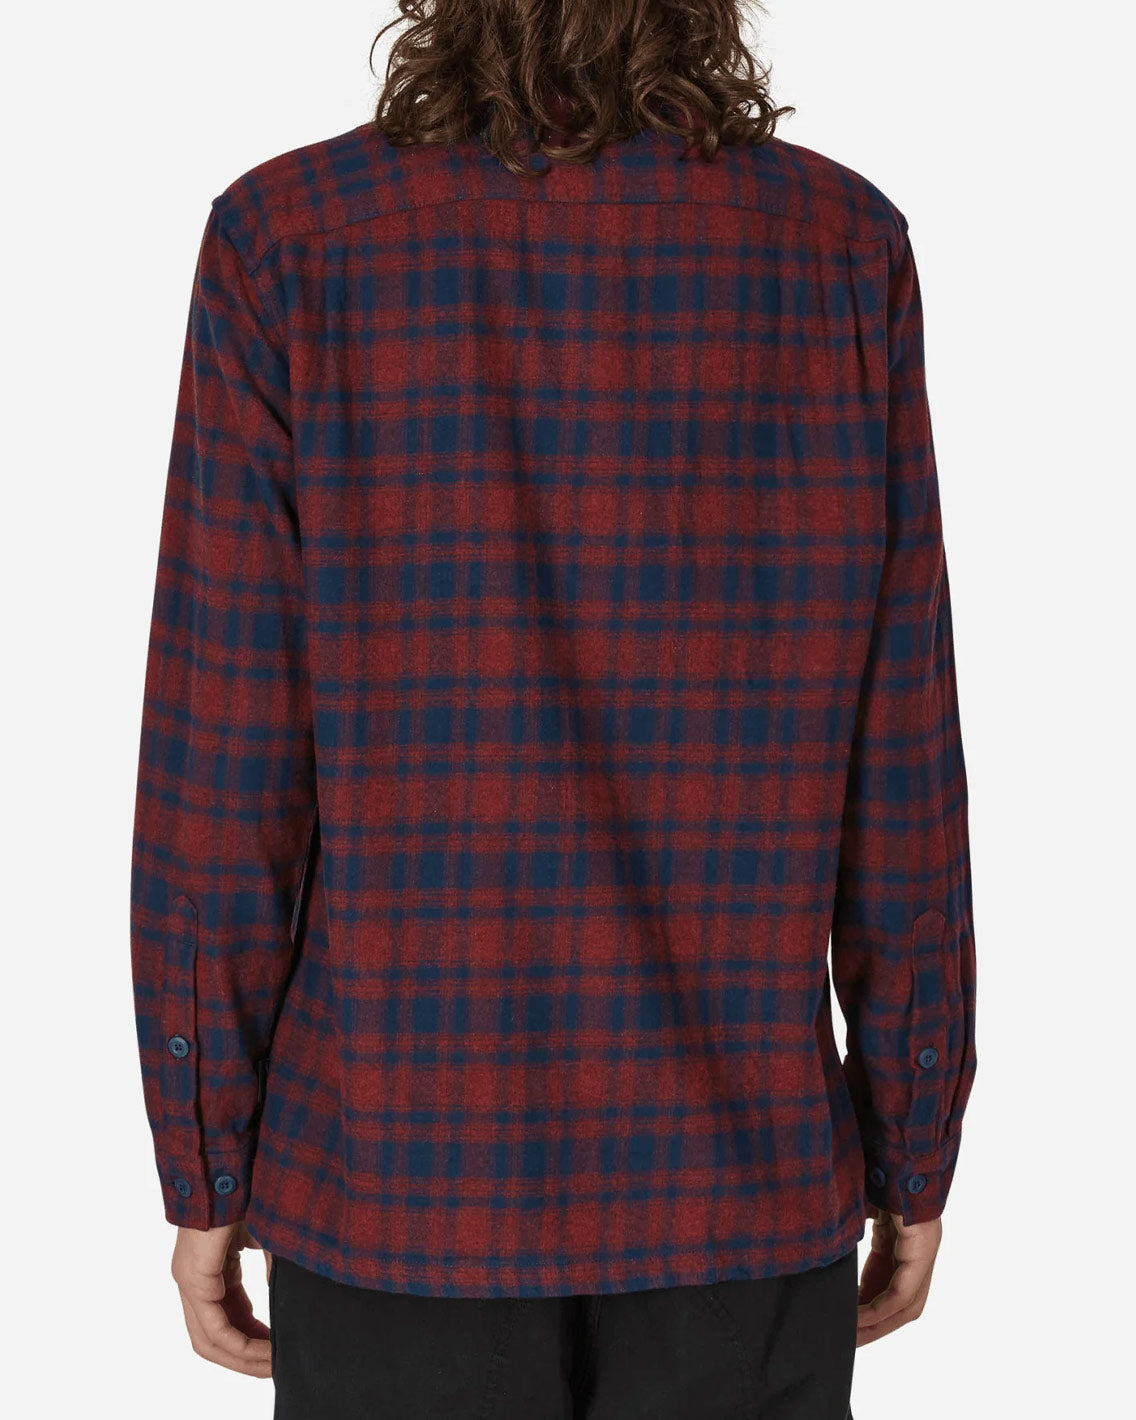 Patagonia - M's L/S Organic Cotton Fjord Flannel Shirt - Sequoia Red